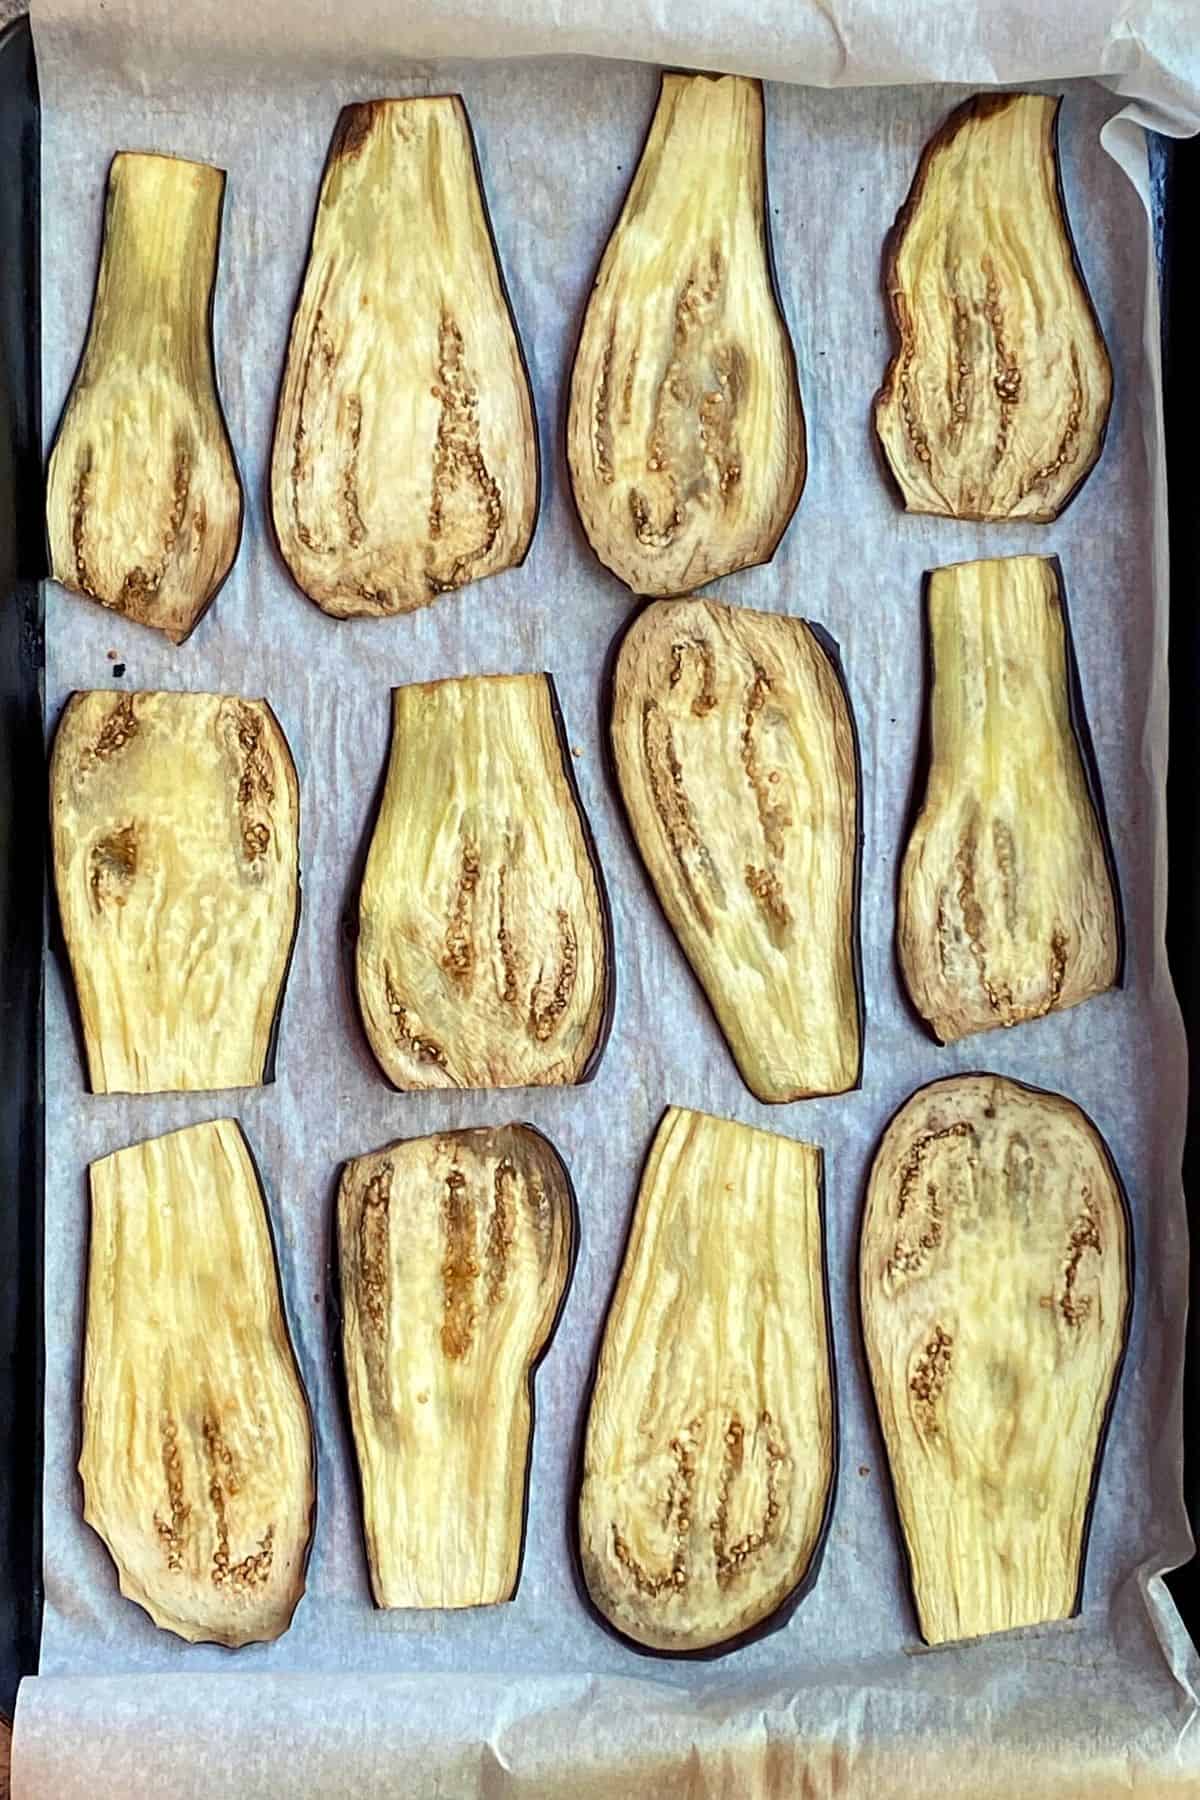 An overhead view of a parchment paper lined cookie sheet with baked slices of eggplant